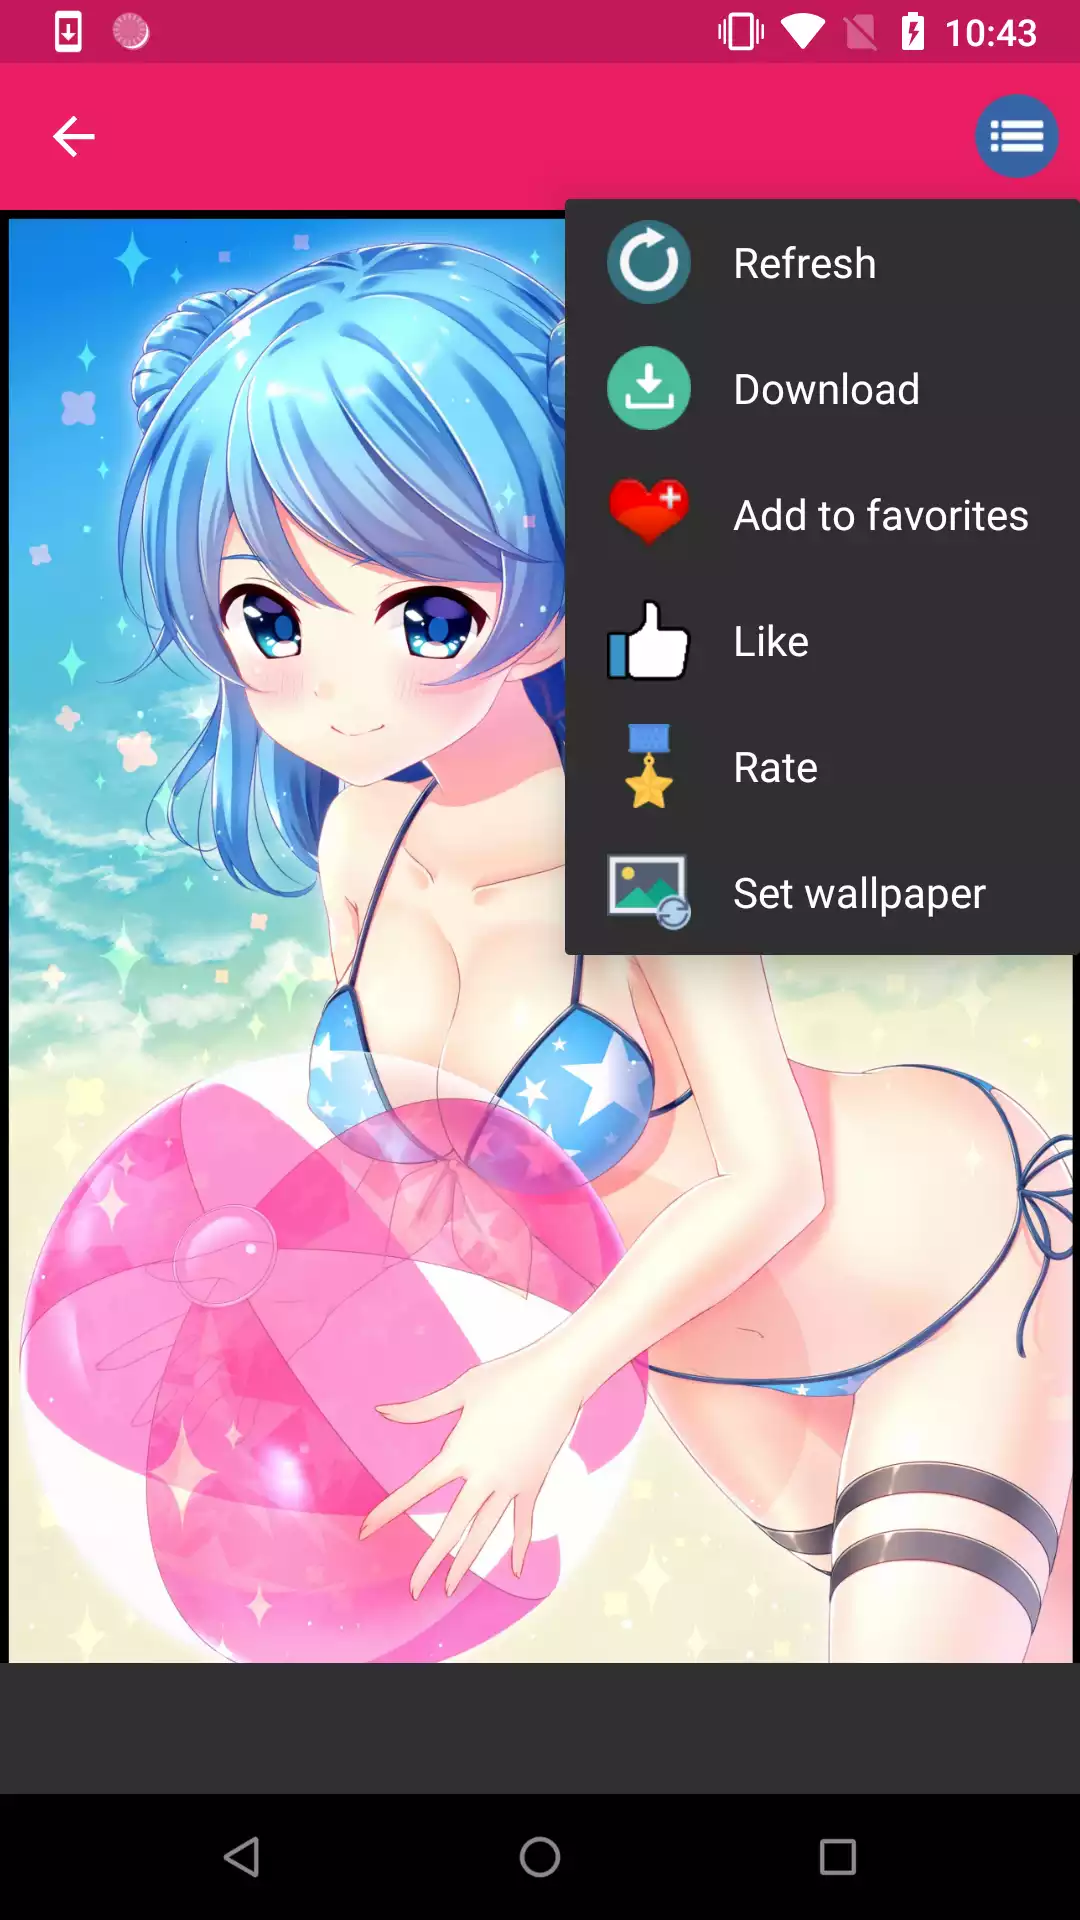 Sexy Anime Girls Wallpapers download,hantai,photo,screensaver,girl,hentai,offline,pictures,sexy,apk,hot,pic,girls,cosplay,anime,galleries,backgrounds,dreams,wallpapers,shrinking,pornstar,porn,pics